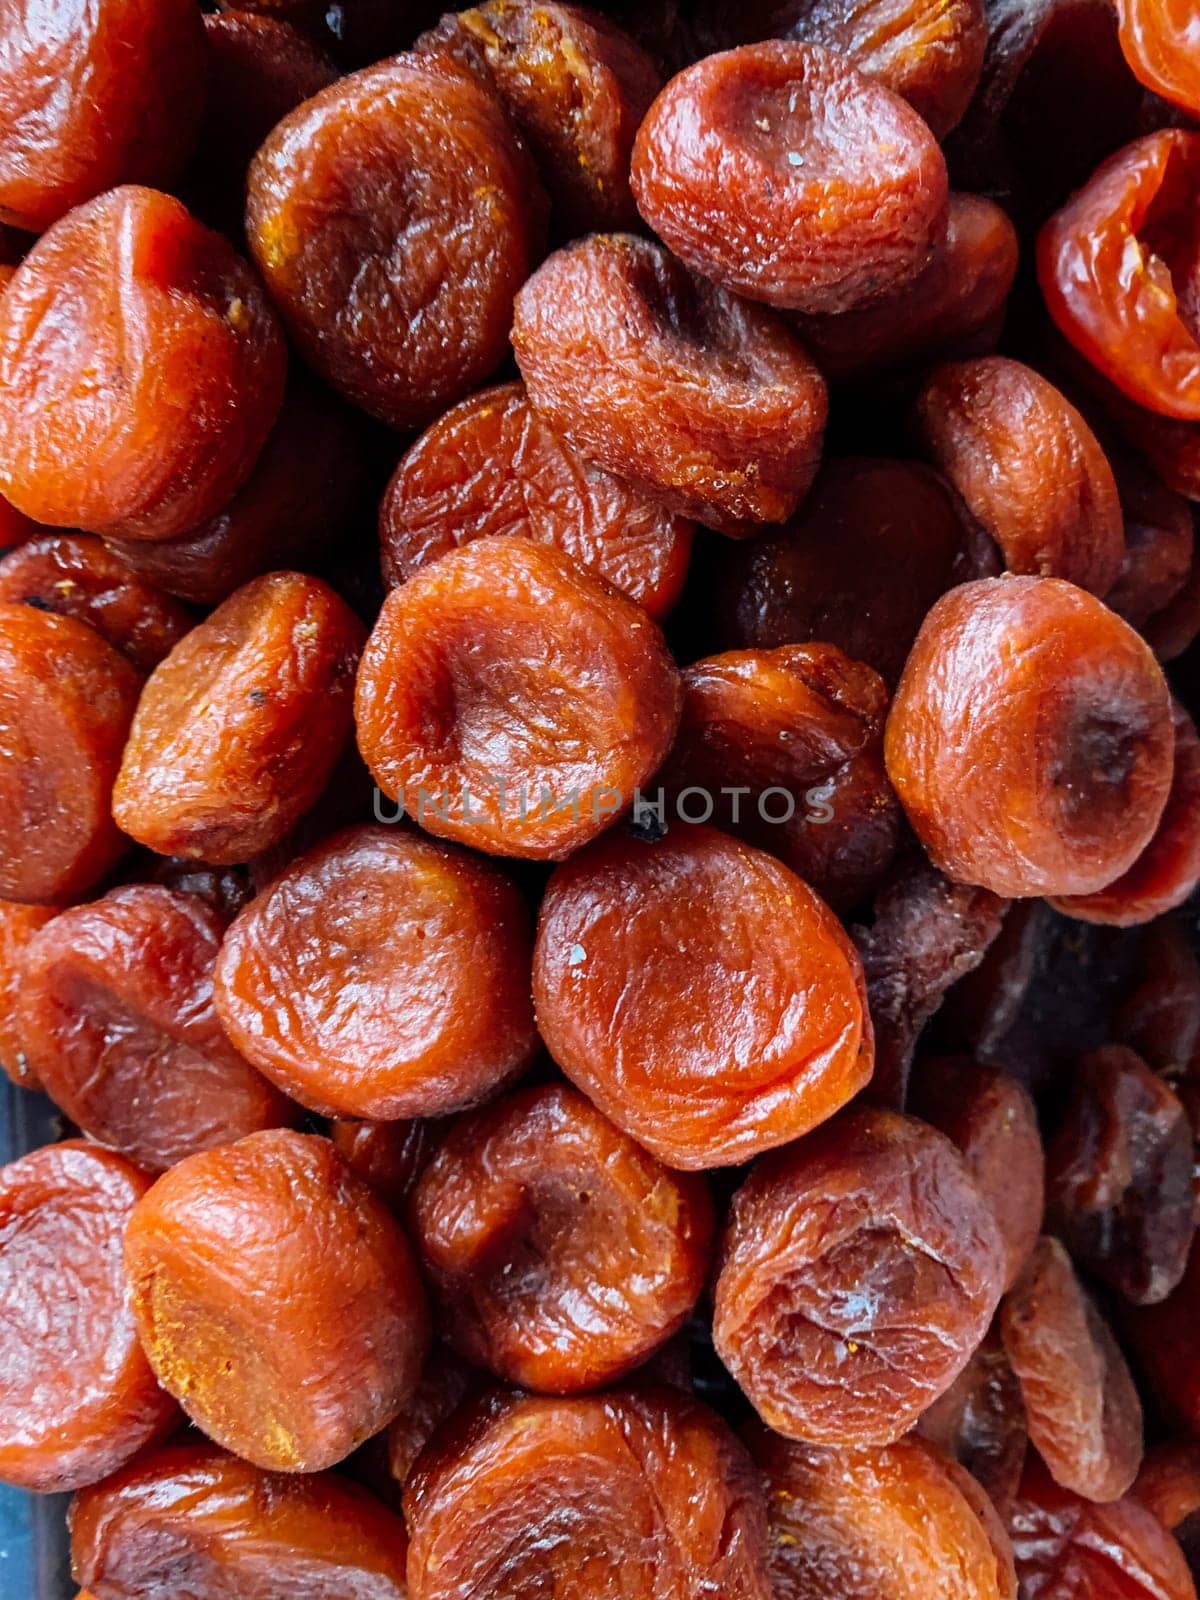 lots of dried fruit for eating dried apricots